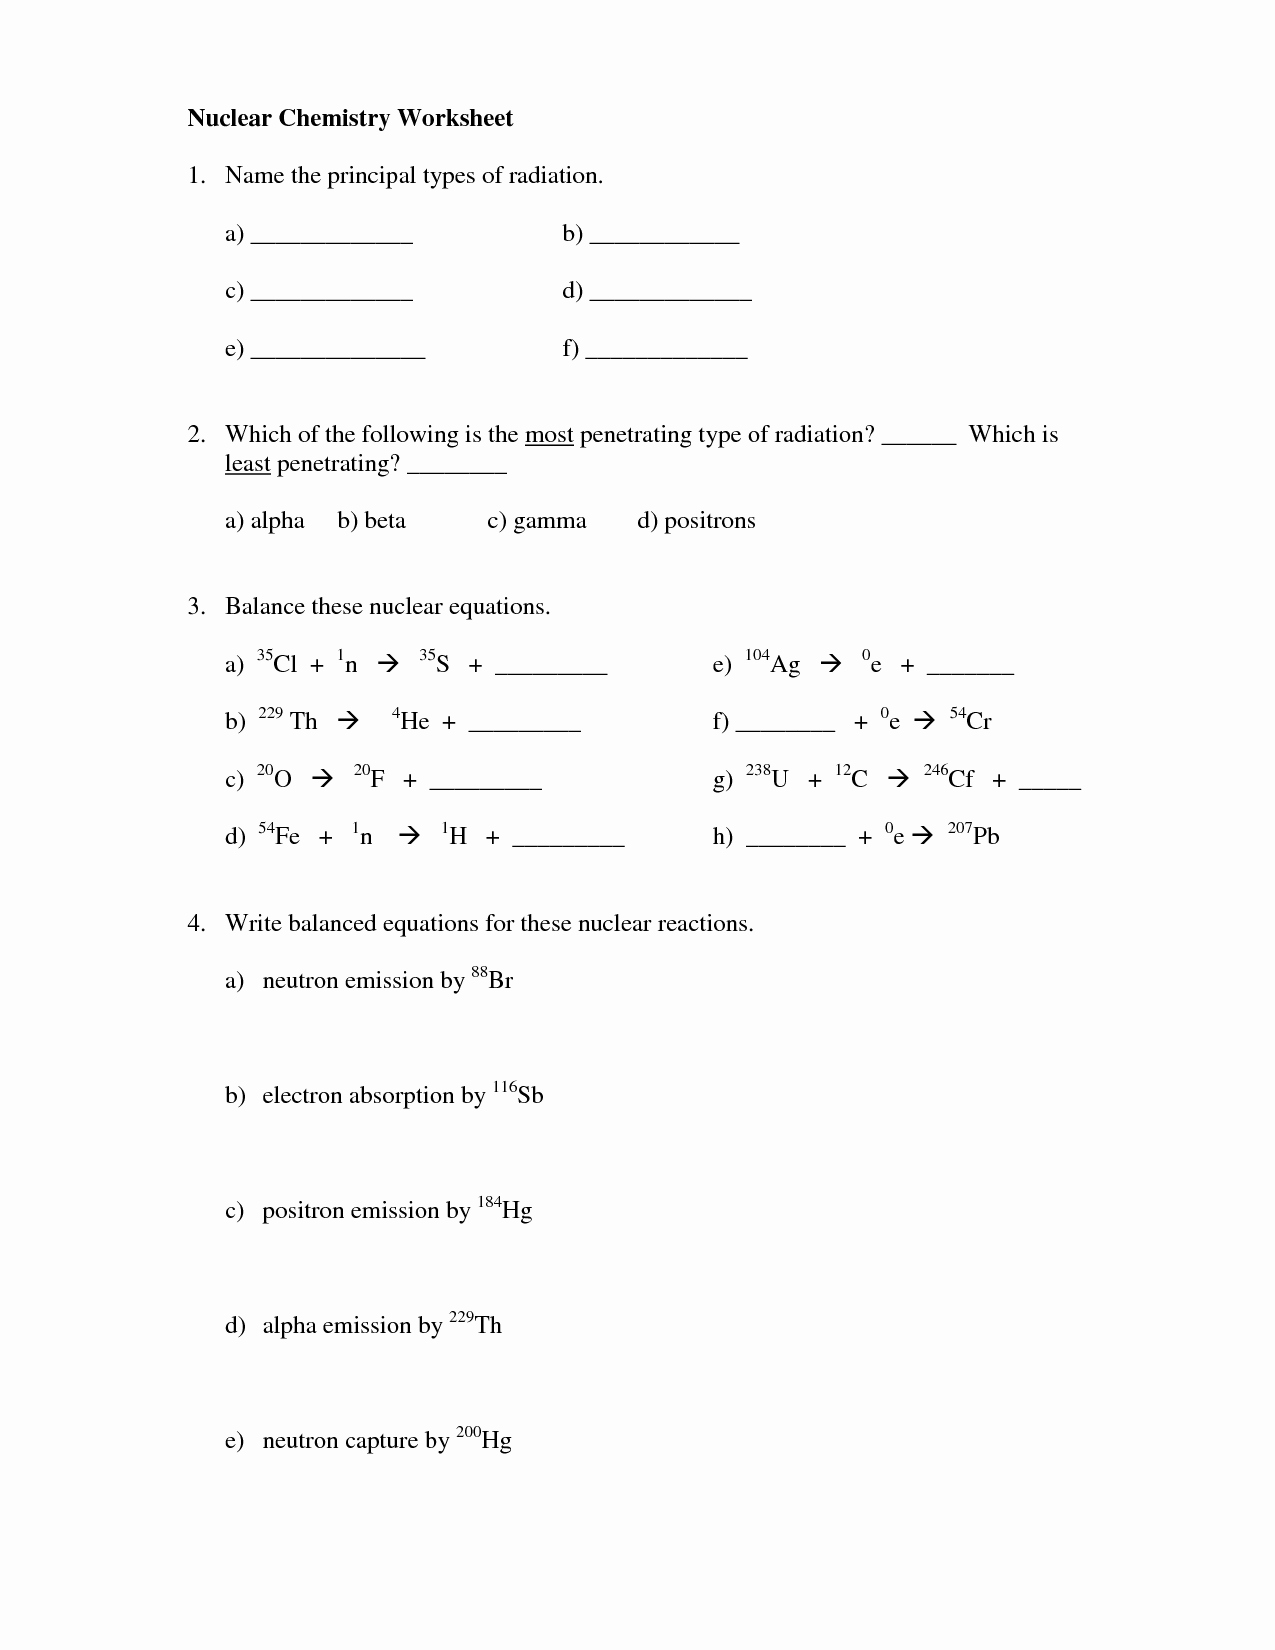 Nuclear Reactions Worksheet Answers Elegant 15 Best Of Nuclear Chemistry Worksheet Answer Key